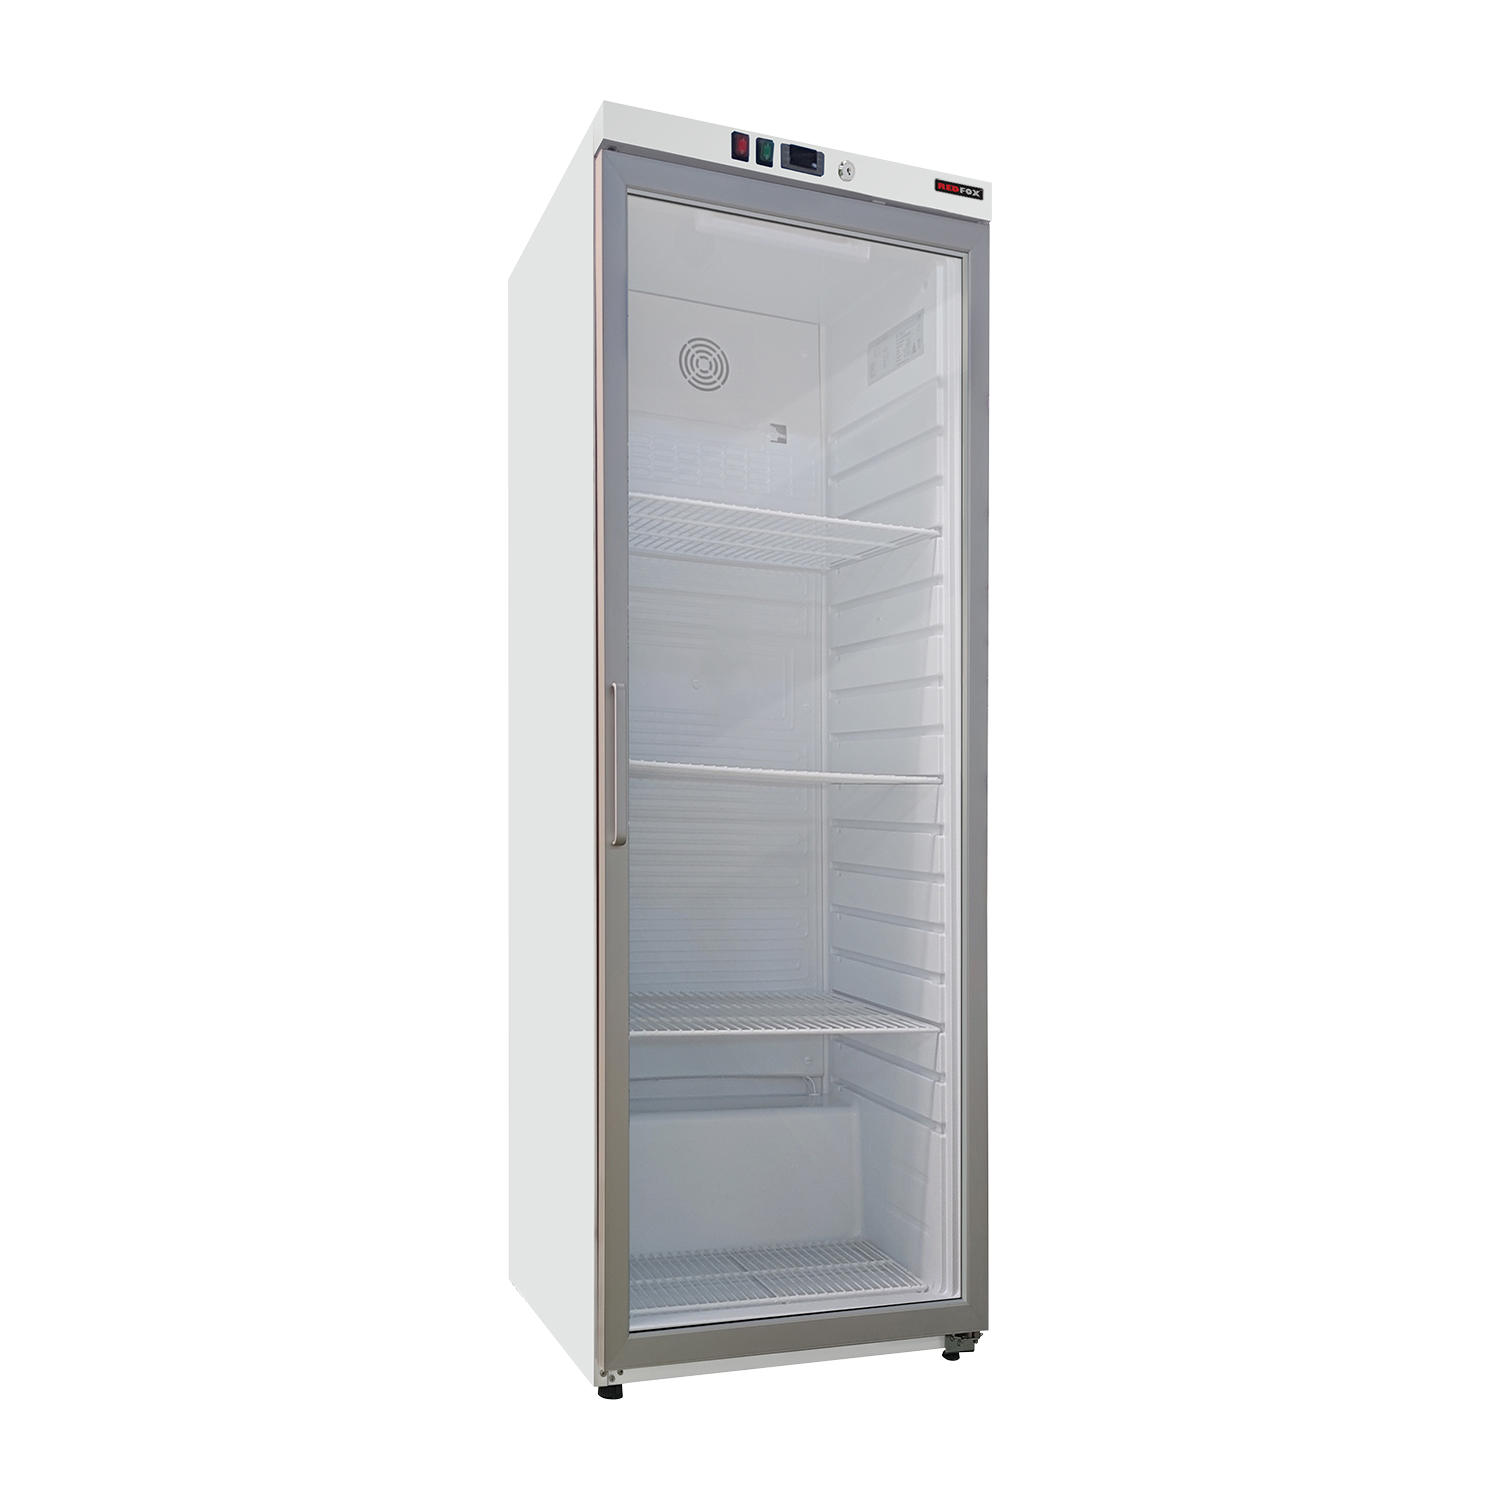 Cooling cabinet 570 l, glass door, white | REDFOX - DRR 600/G